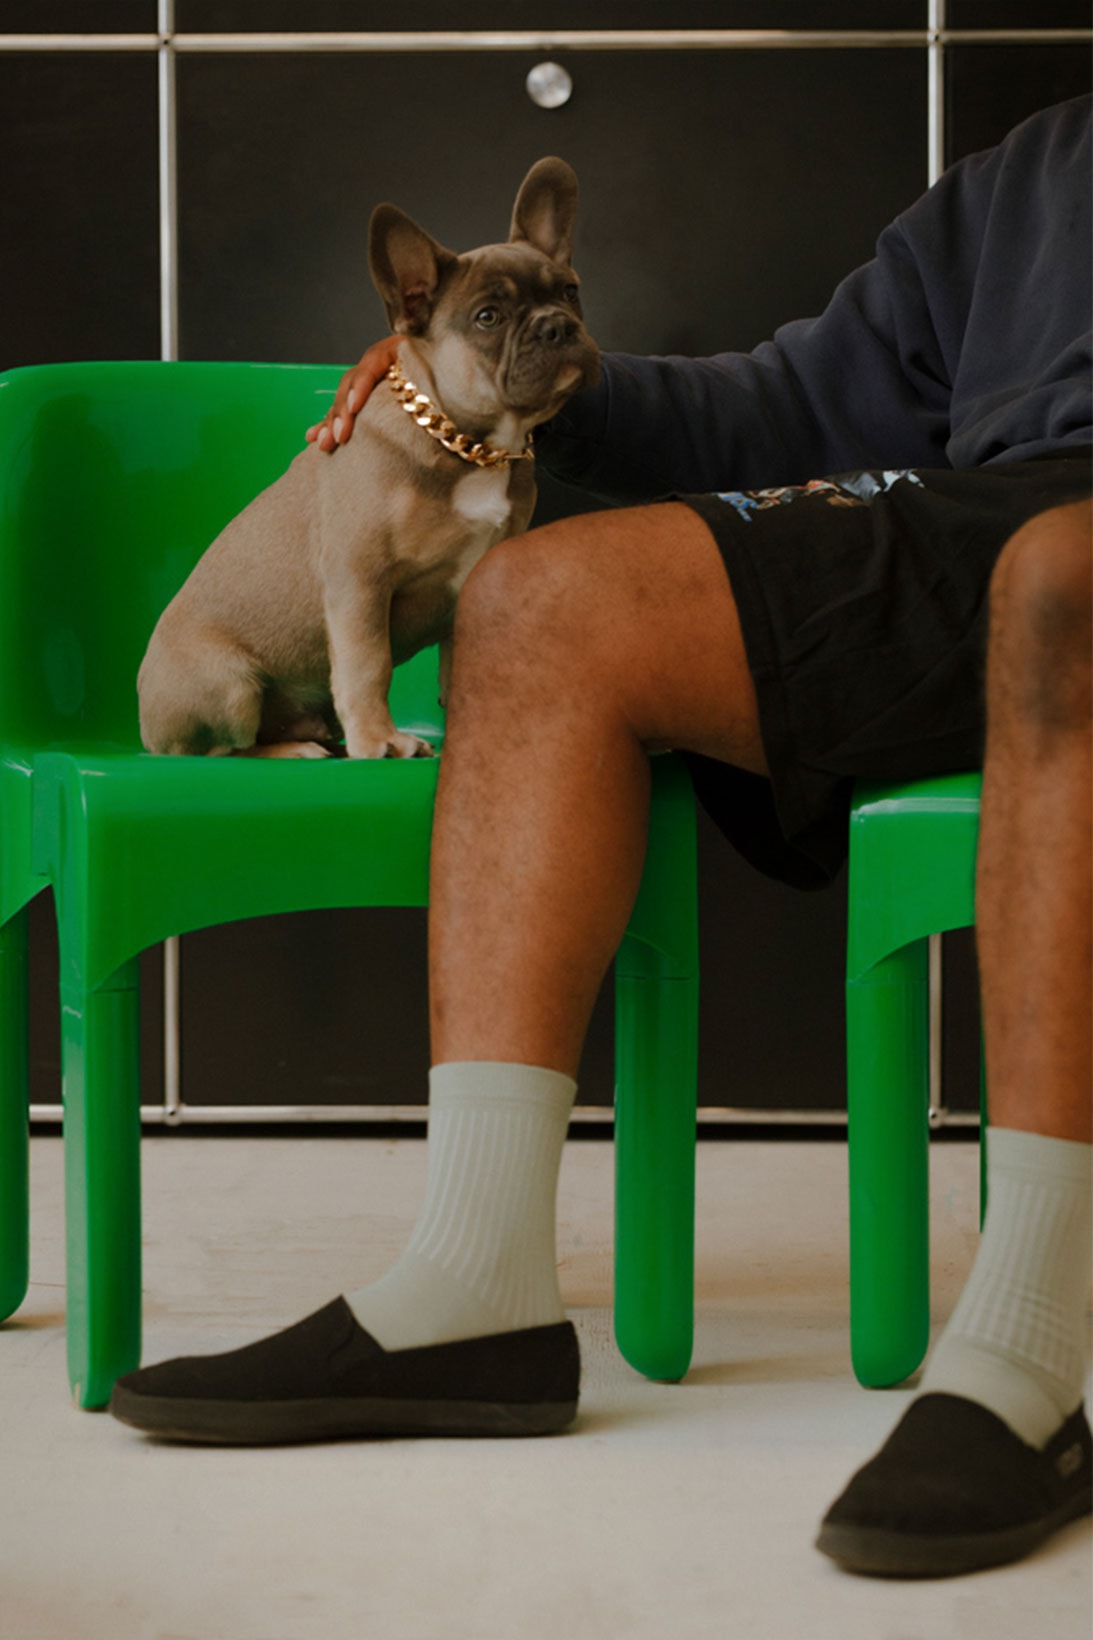 comme si lichen collaboration lookbook campaign hassan rahim dog puppy